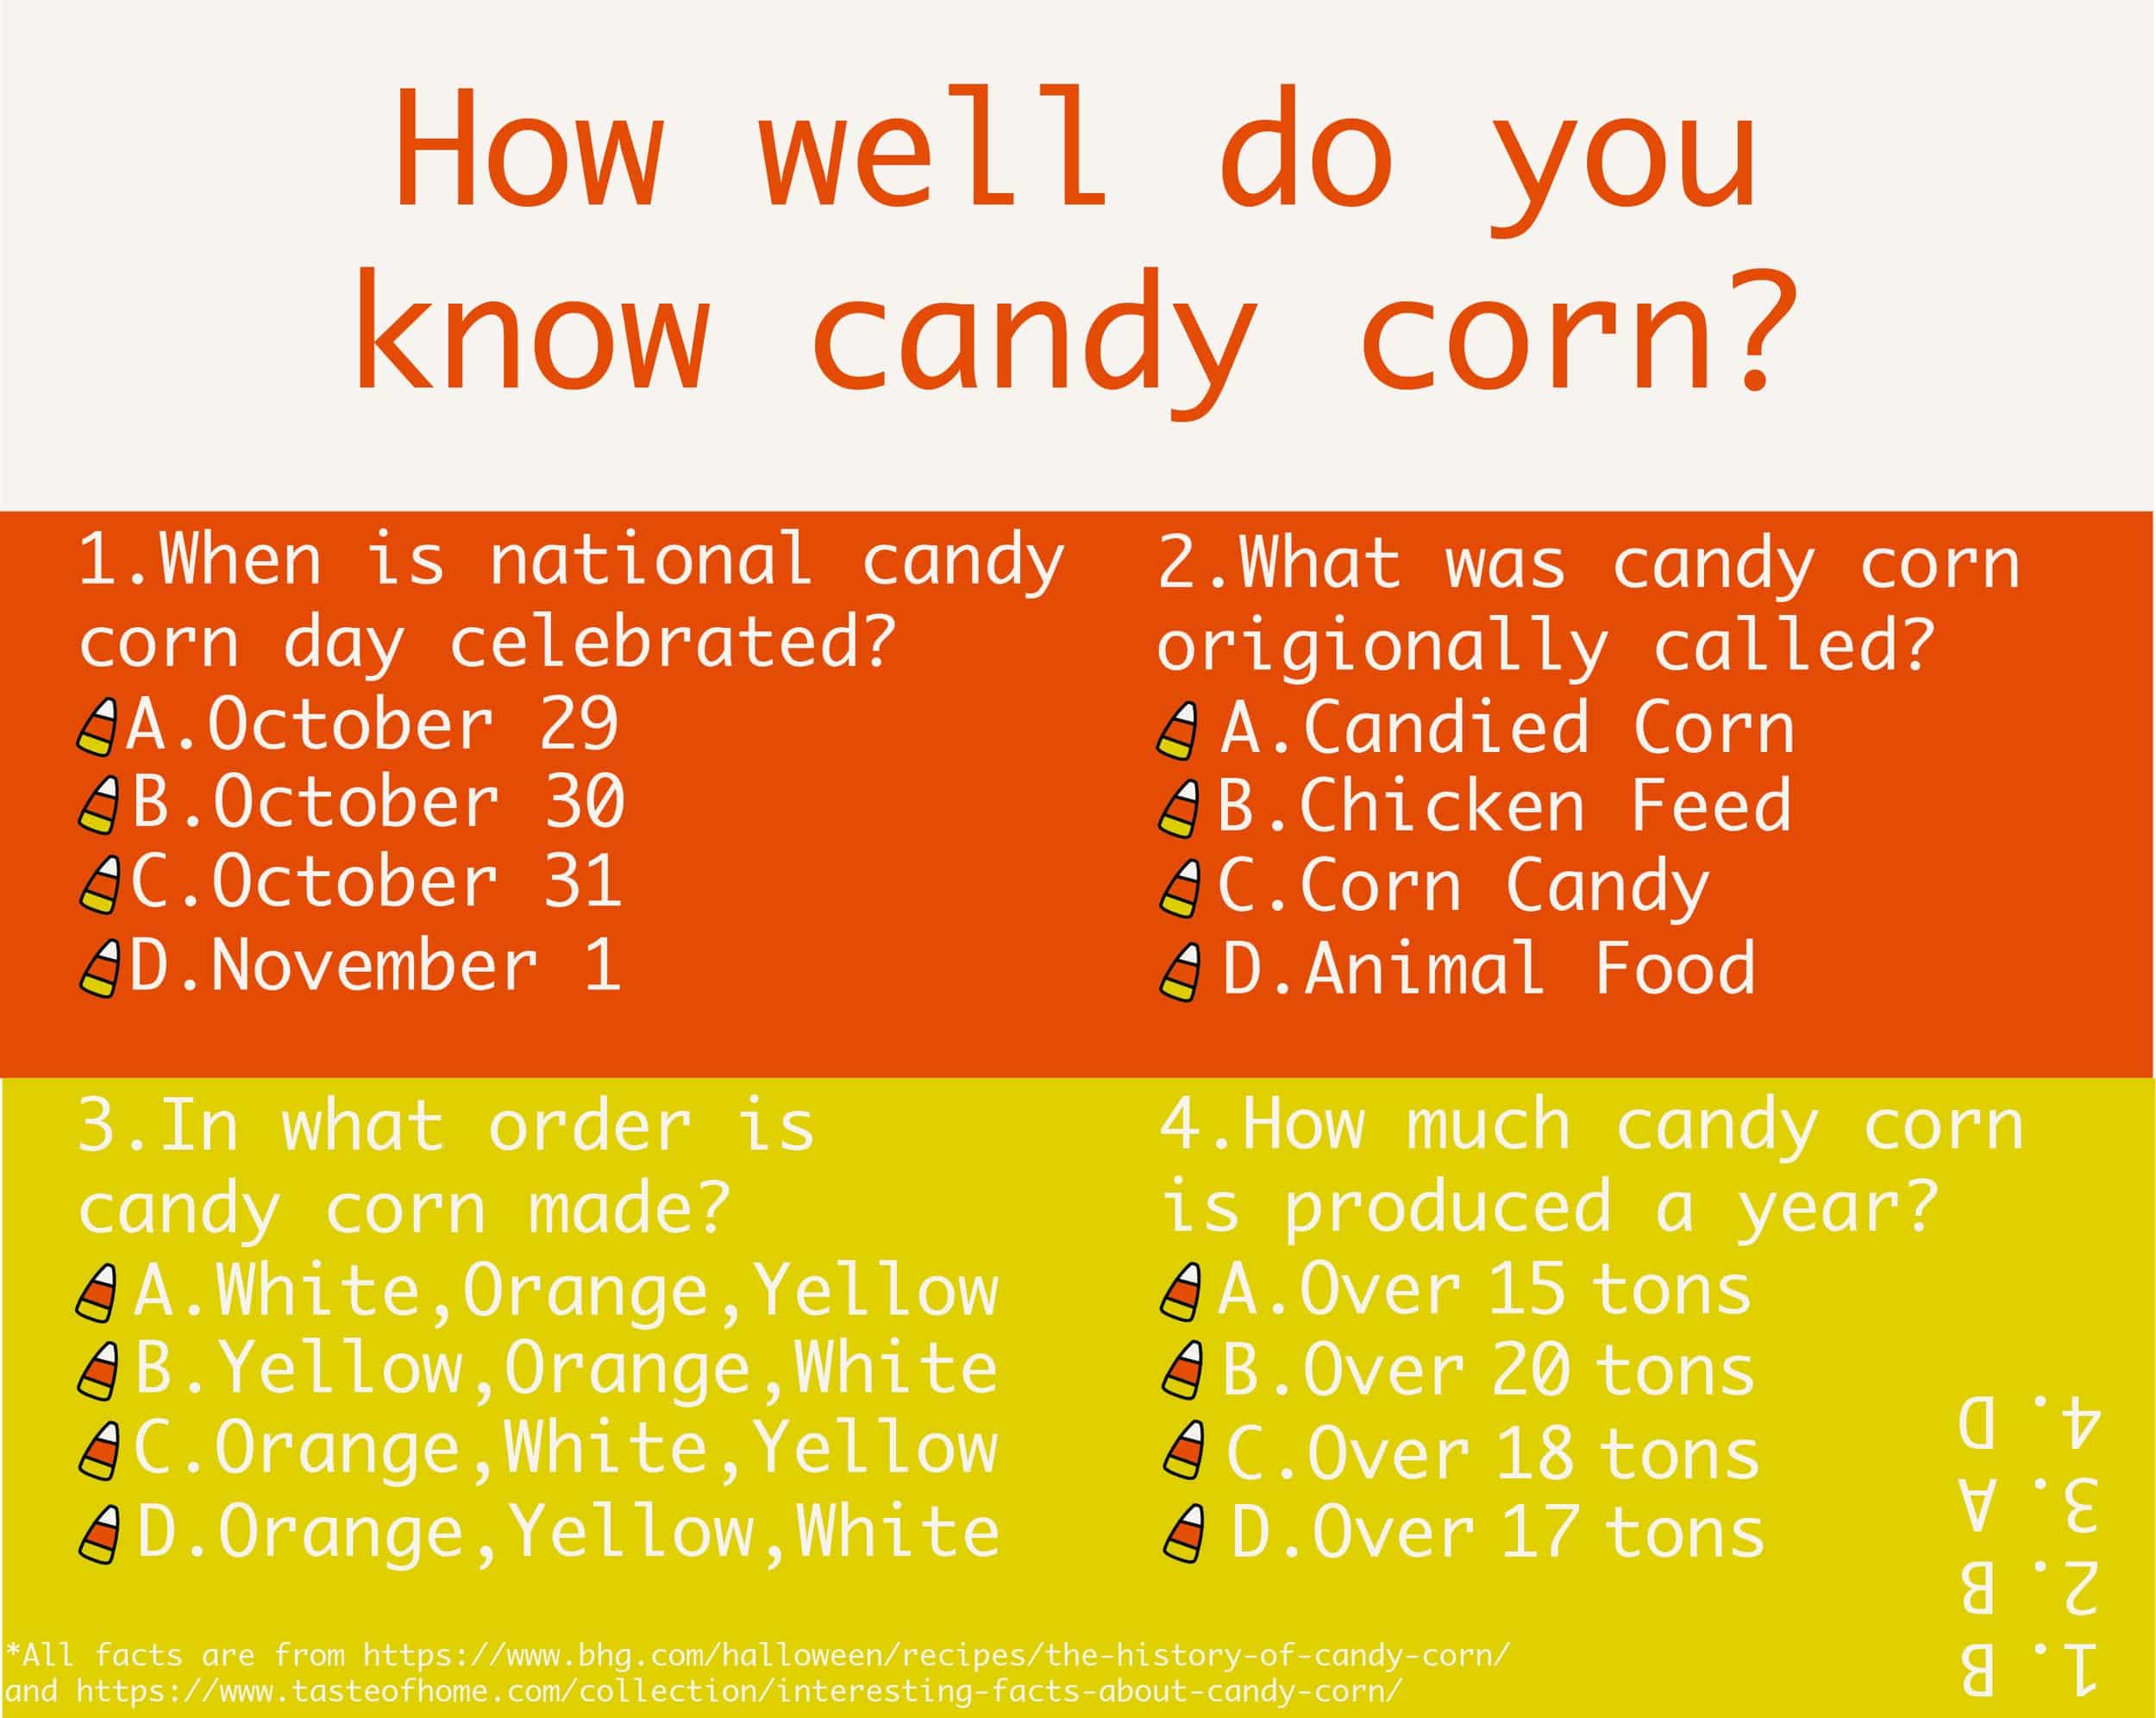 With National Candy Corn Day right around the corner, how many of these candy corn facts do you know?